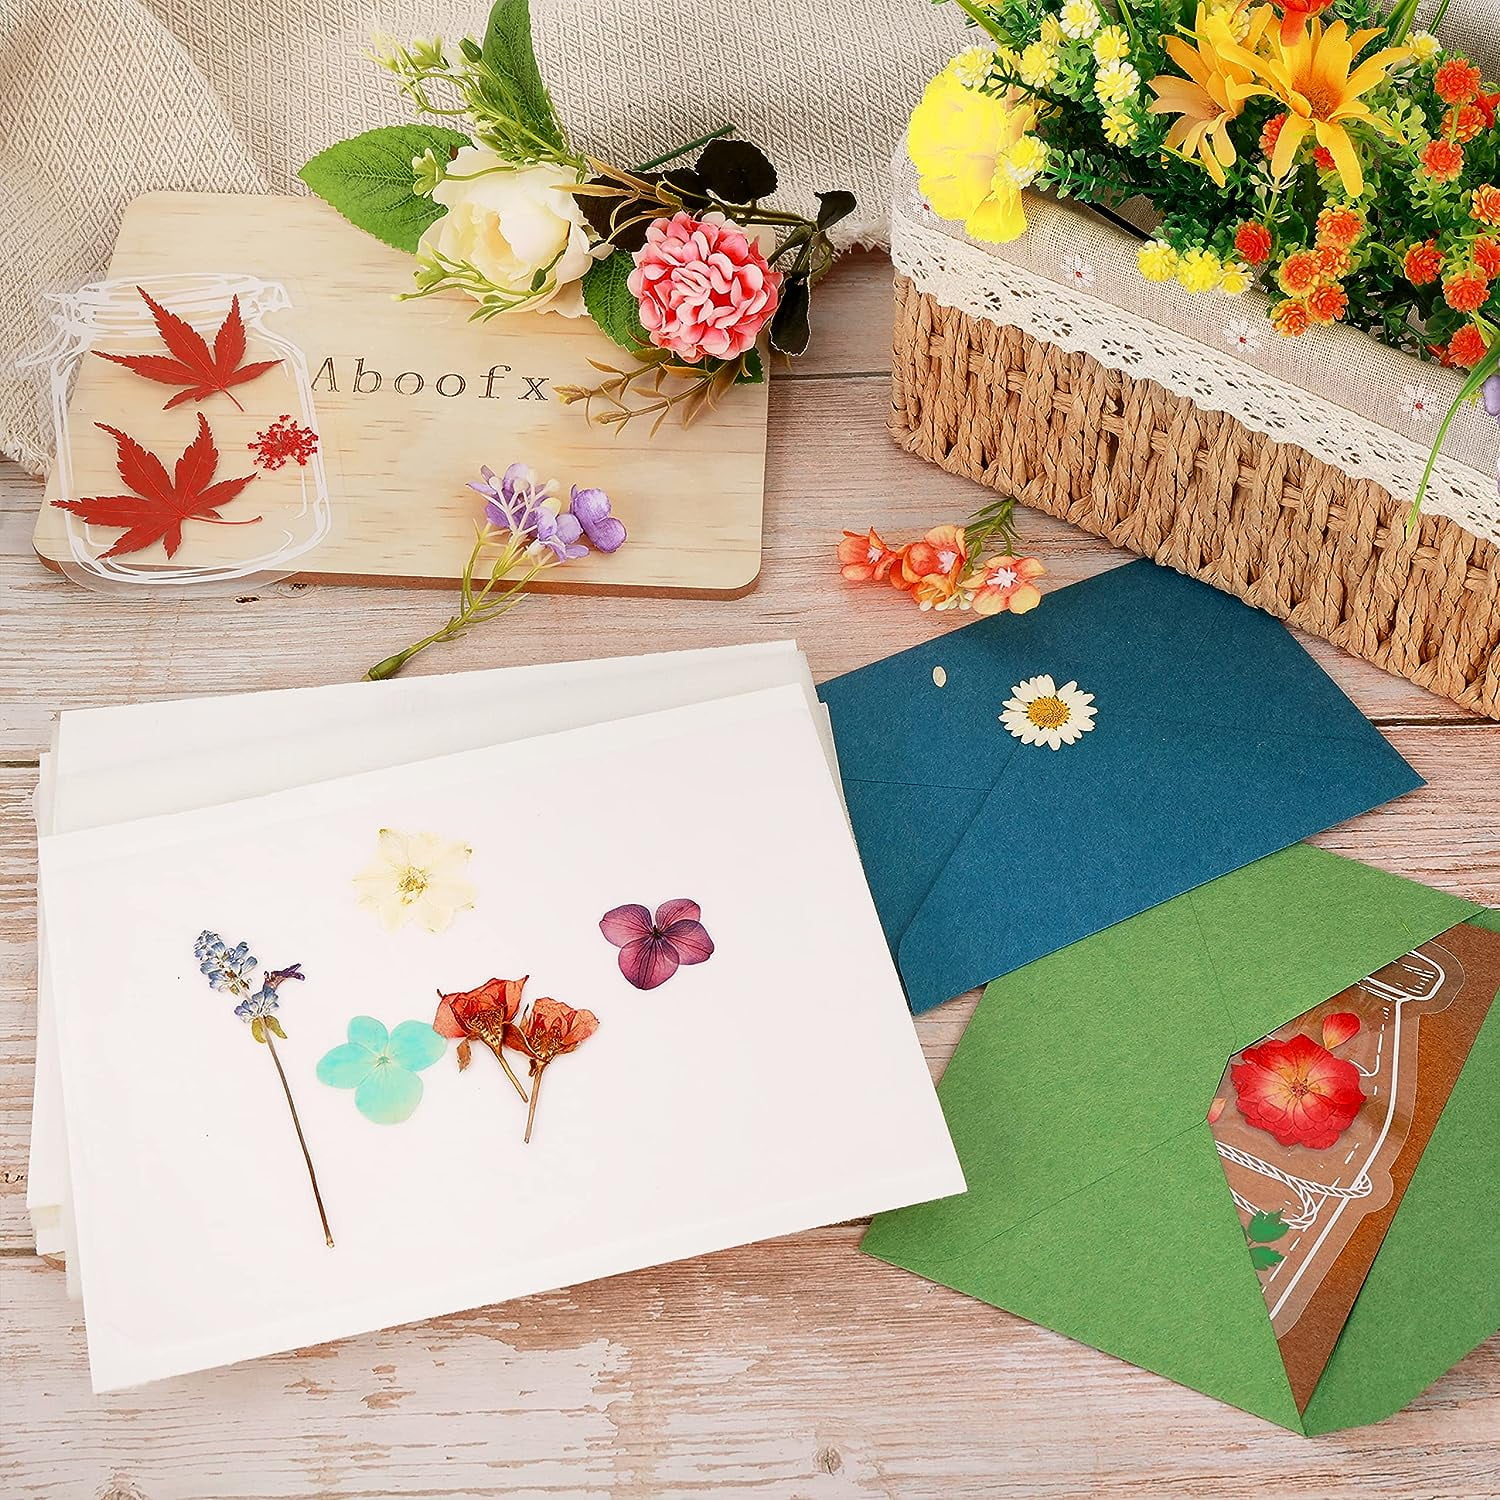 Flower Press Kit Leaf Press Plant Press, 6.3 x 8.3 Inches 6 Layers  Professional Flower Press Kit, Flower Drying Kit with Blank Greeting Cards  for DIY